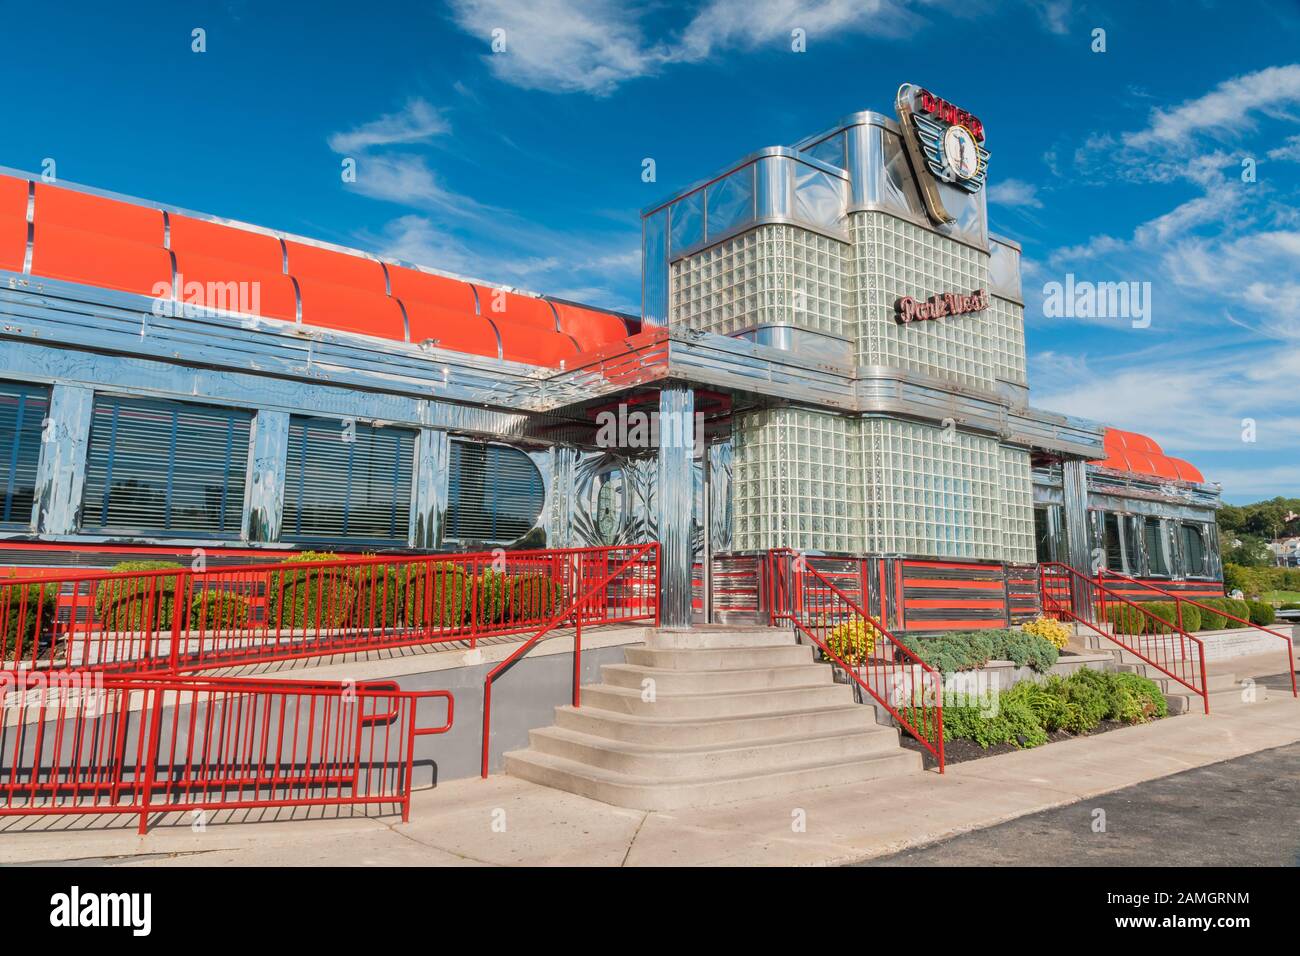 The iconic art deco style Park West diner a well known traditional American restaurant with its polished chrome and enamel exterior Stock Photo